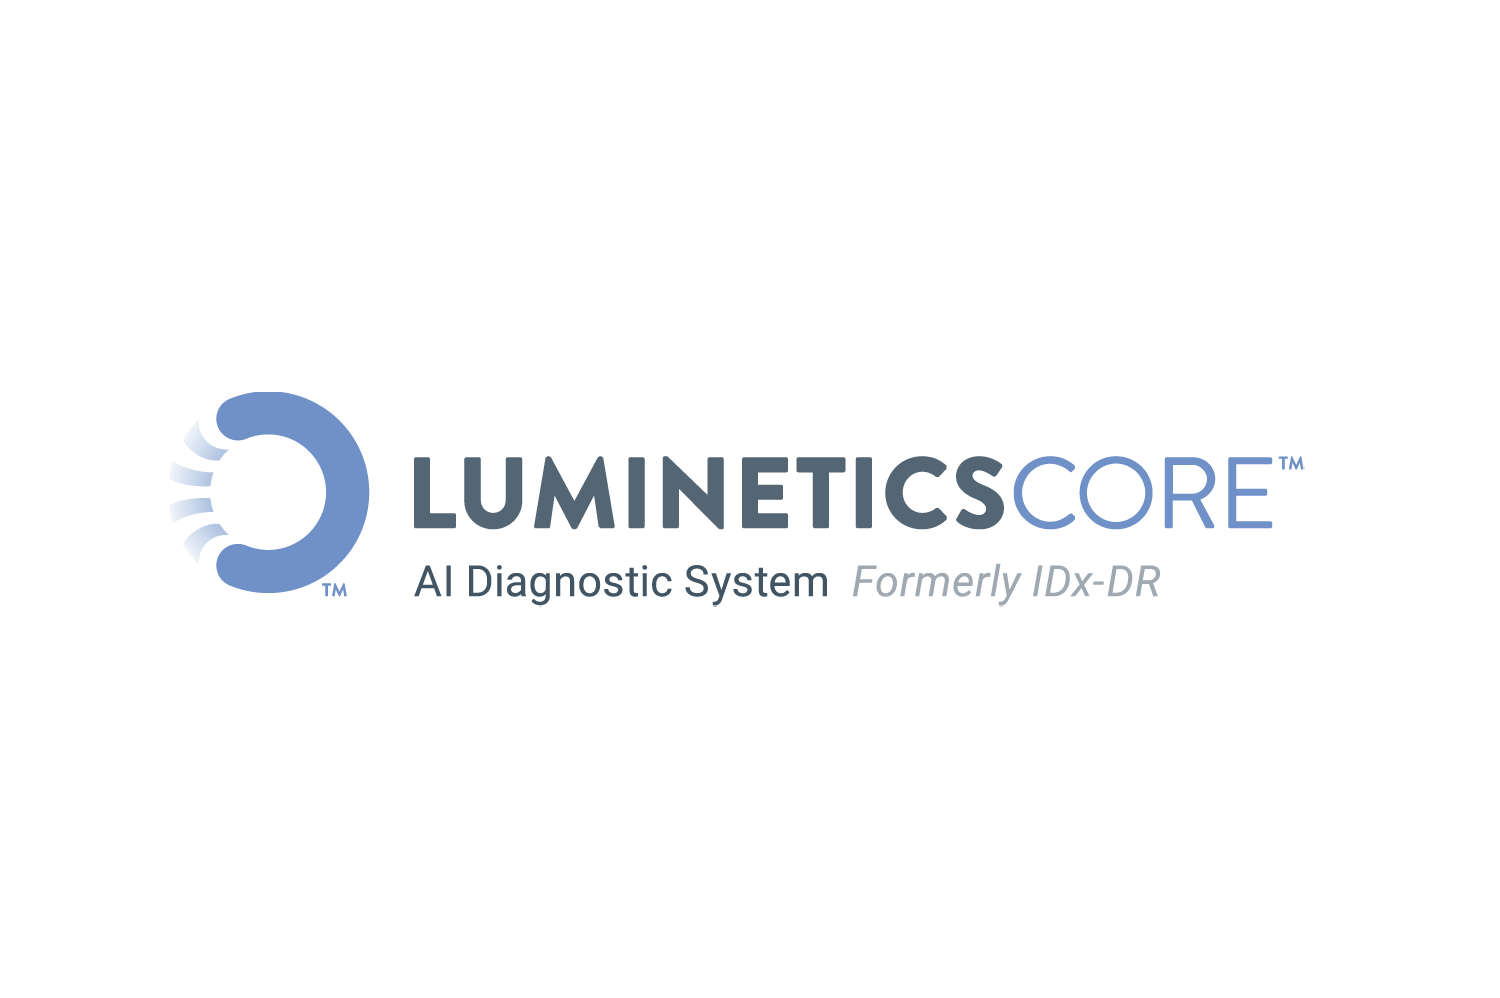 LumineticsCore: A letter from the CEO